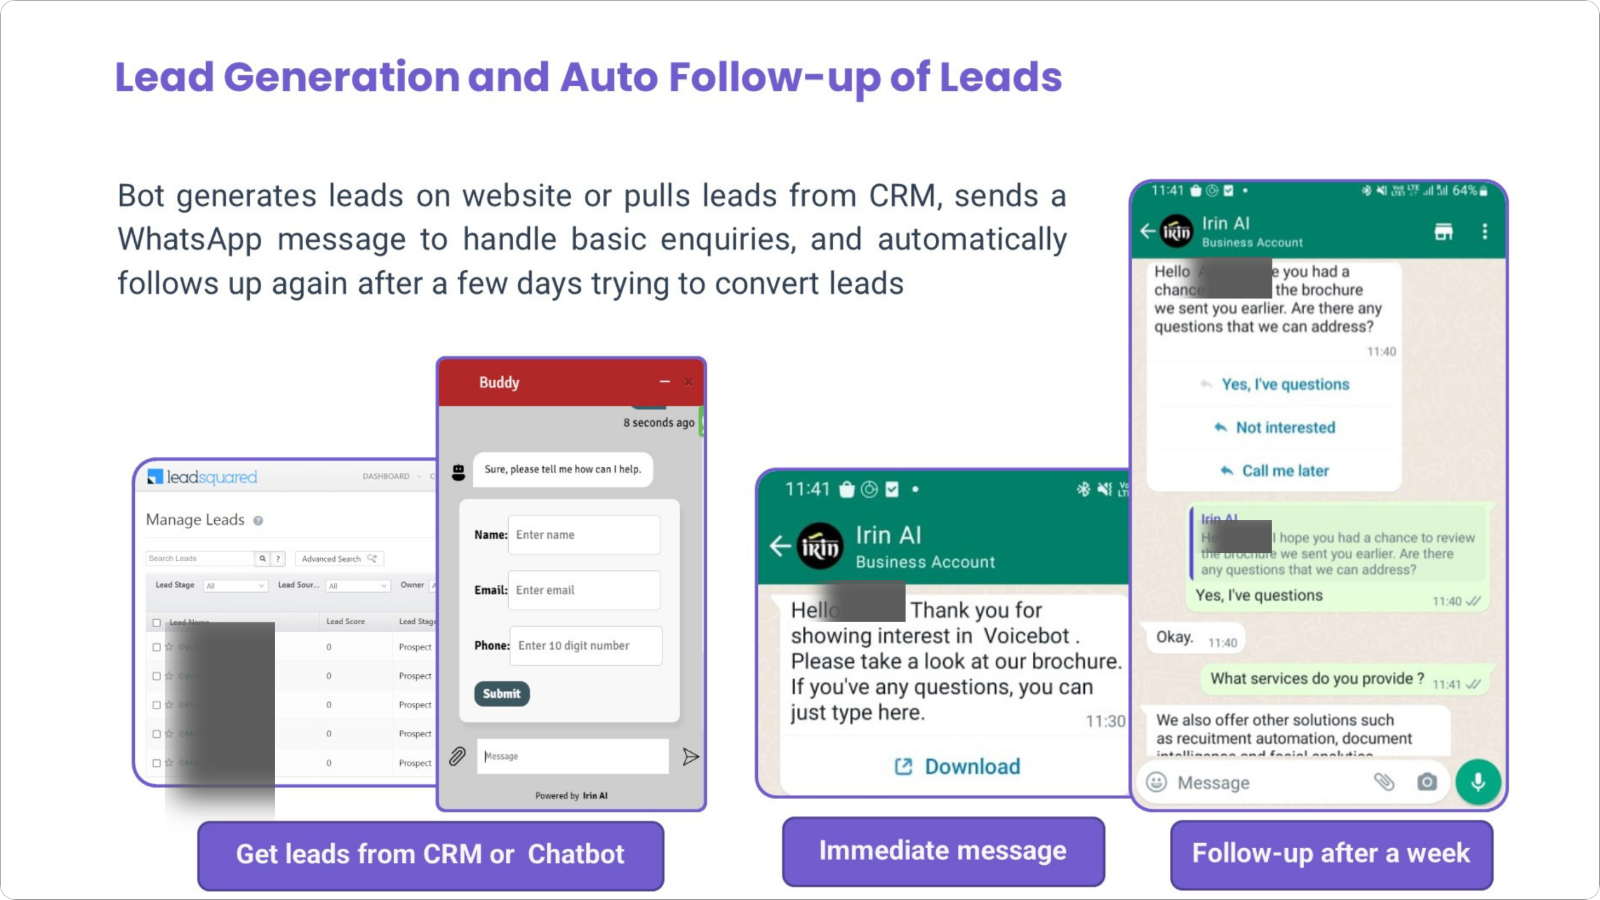 Lead Generation and Auto Follow-up of Leads